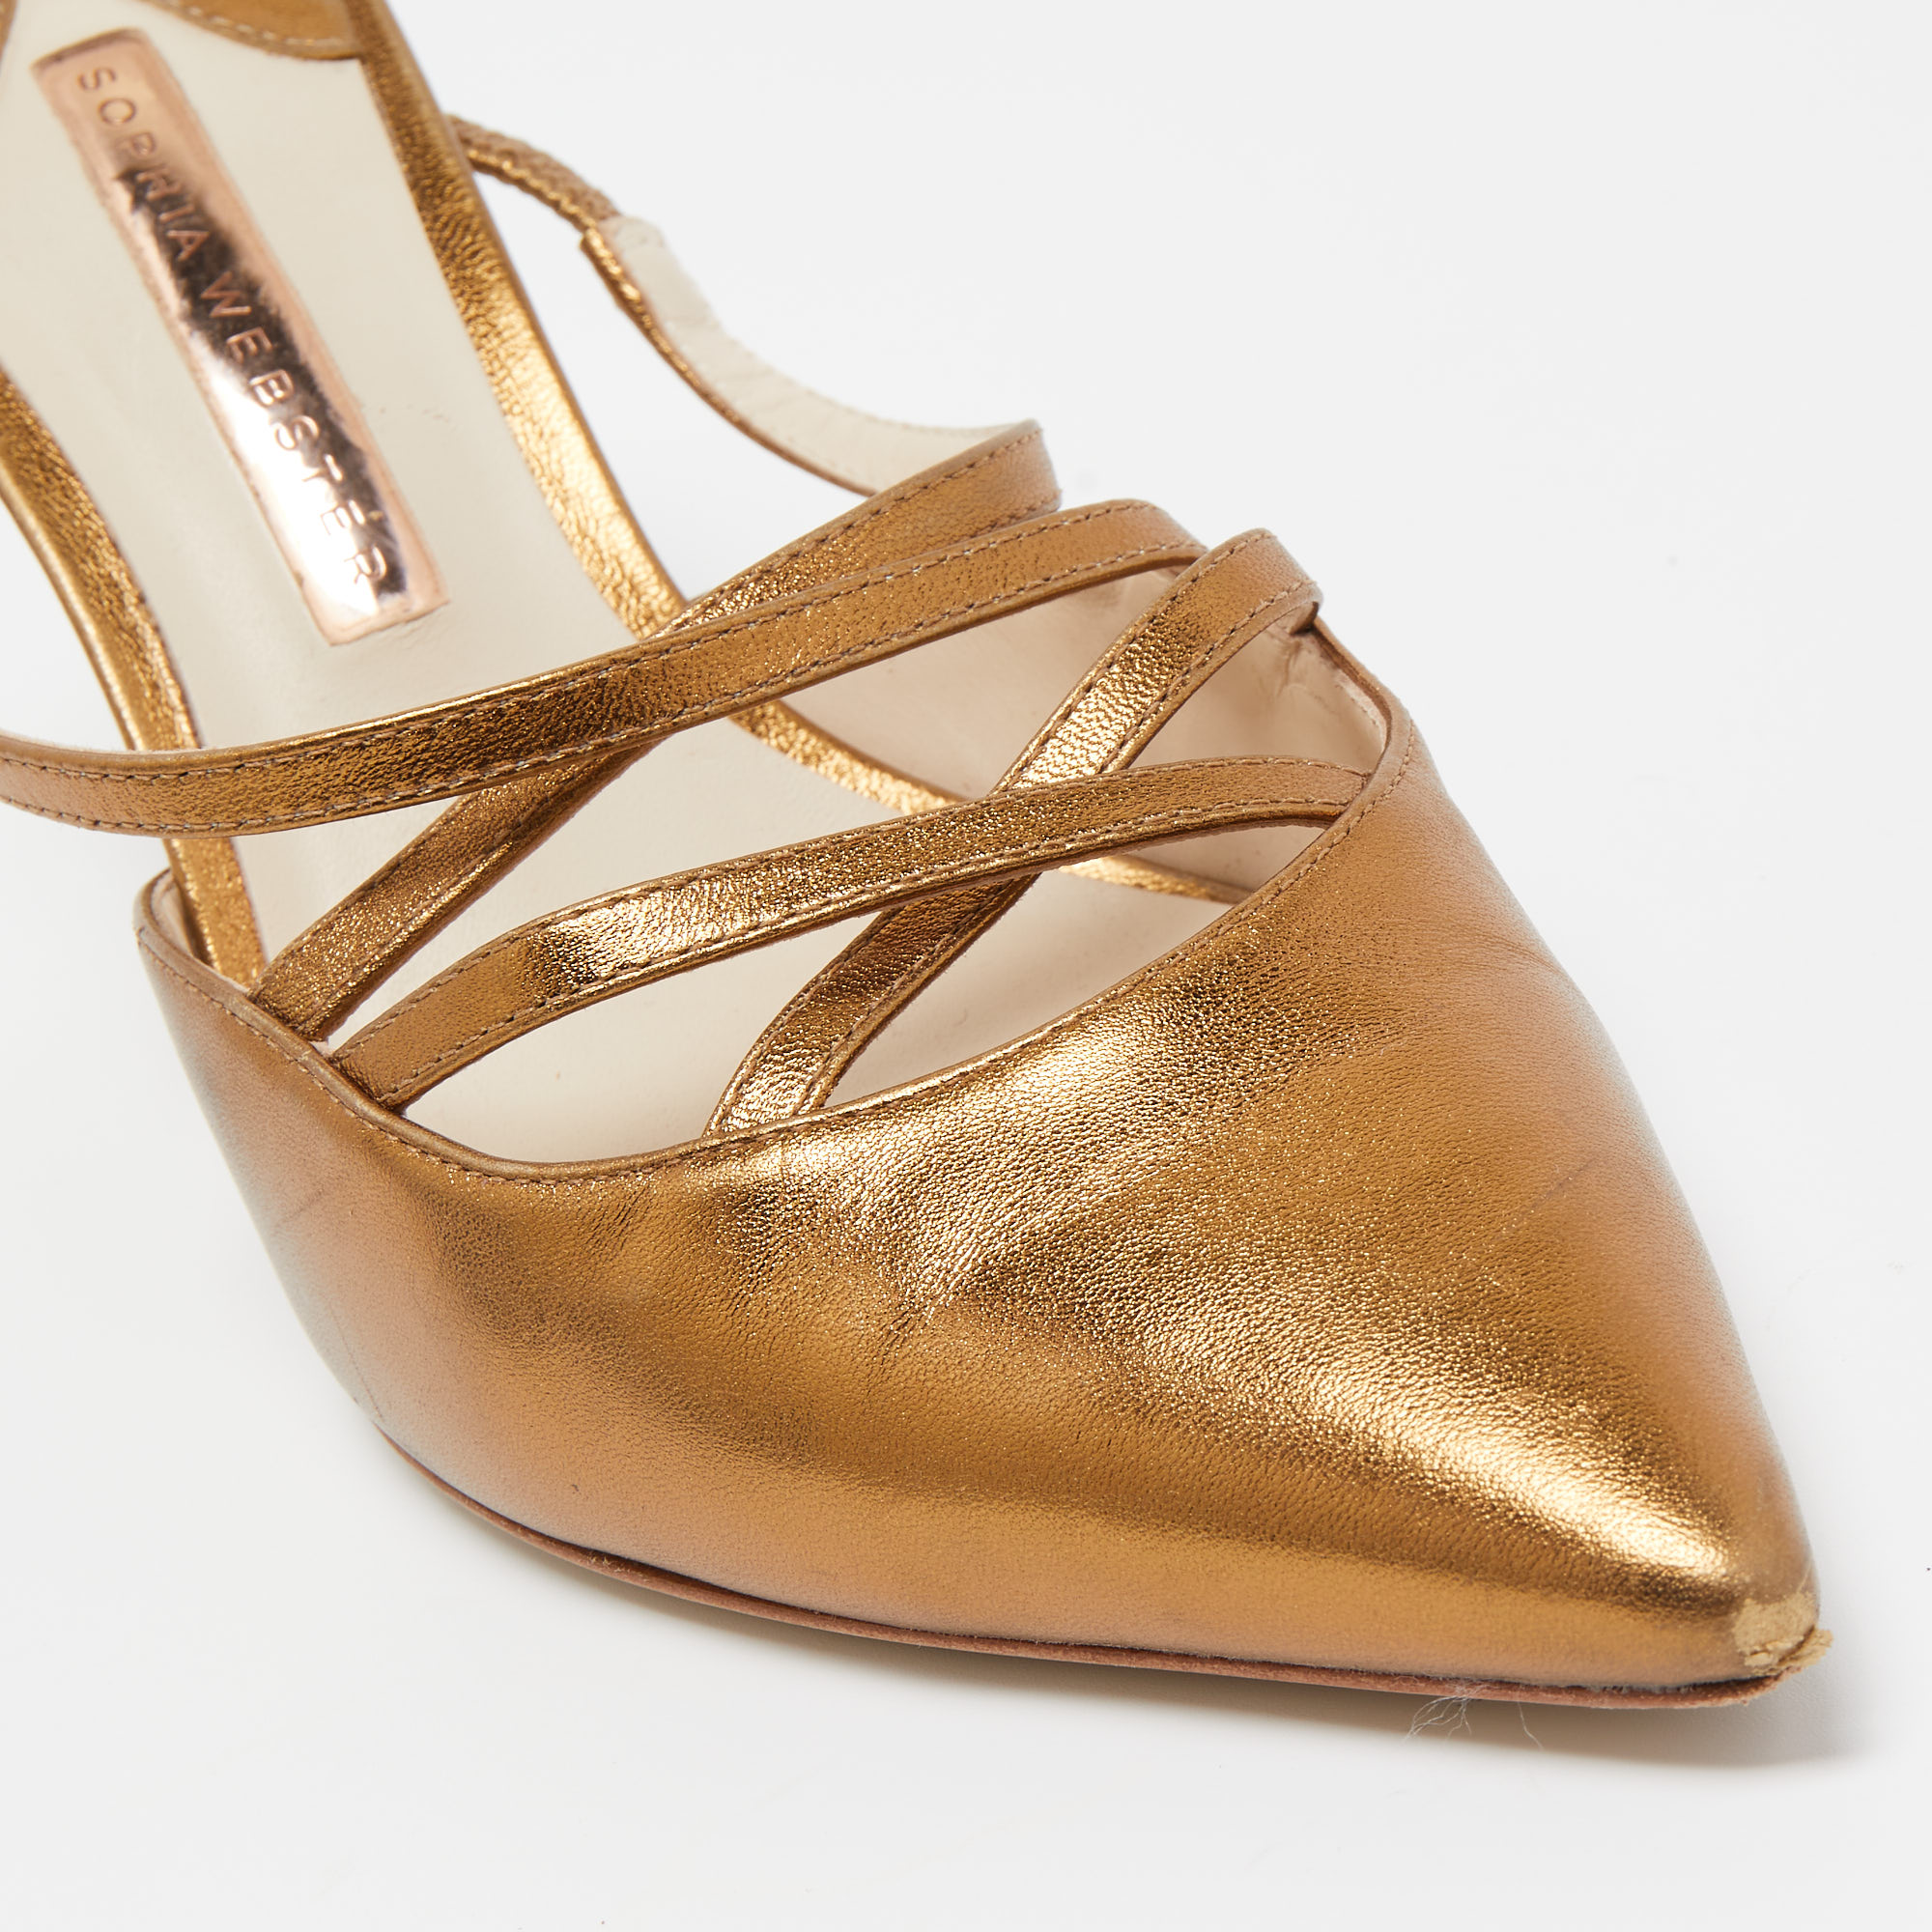 Sophia Webster Metallic Gold Leather Pointed Mules Size 38.5